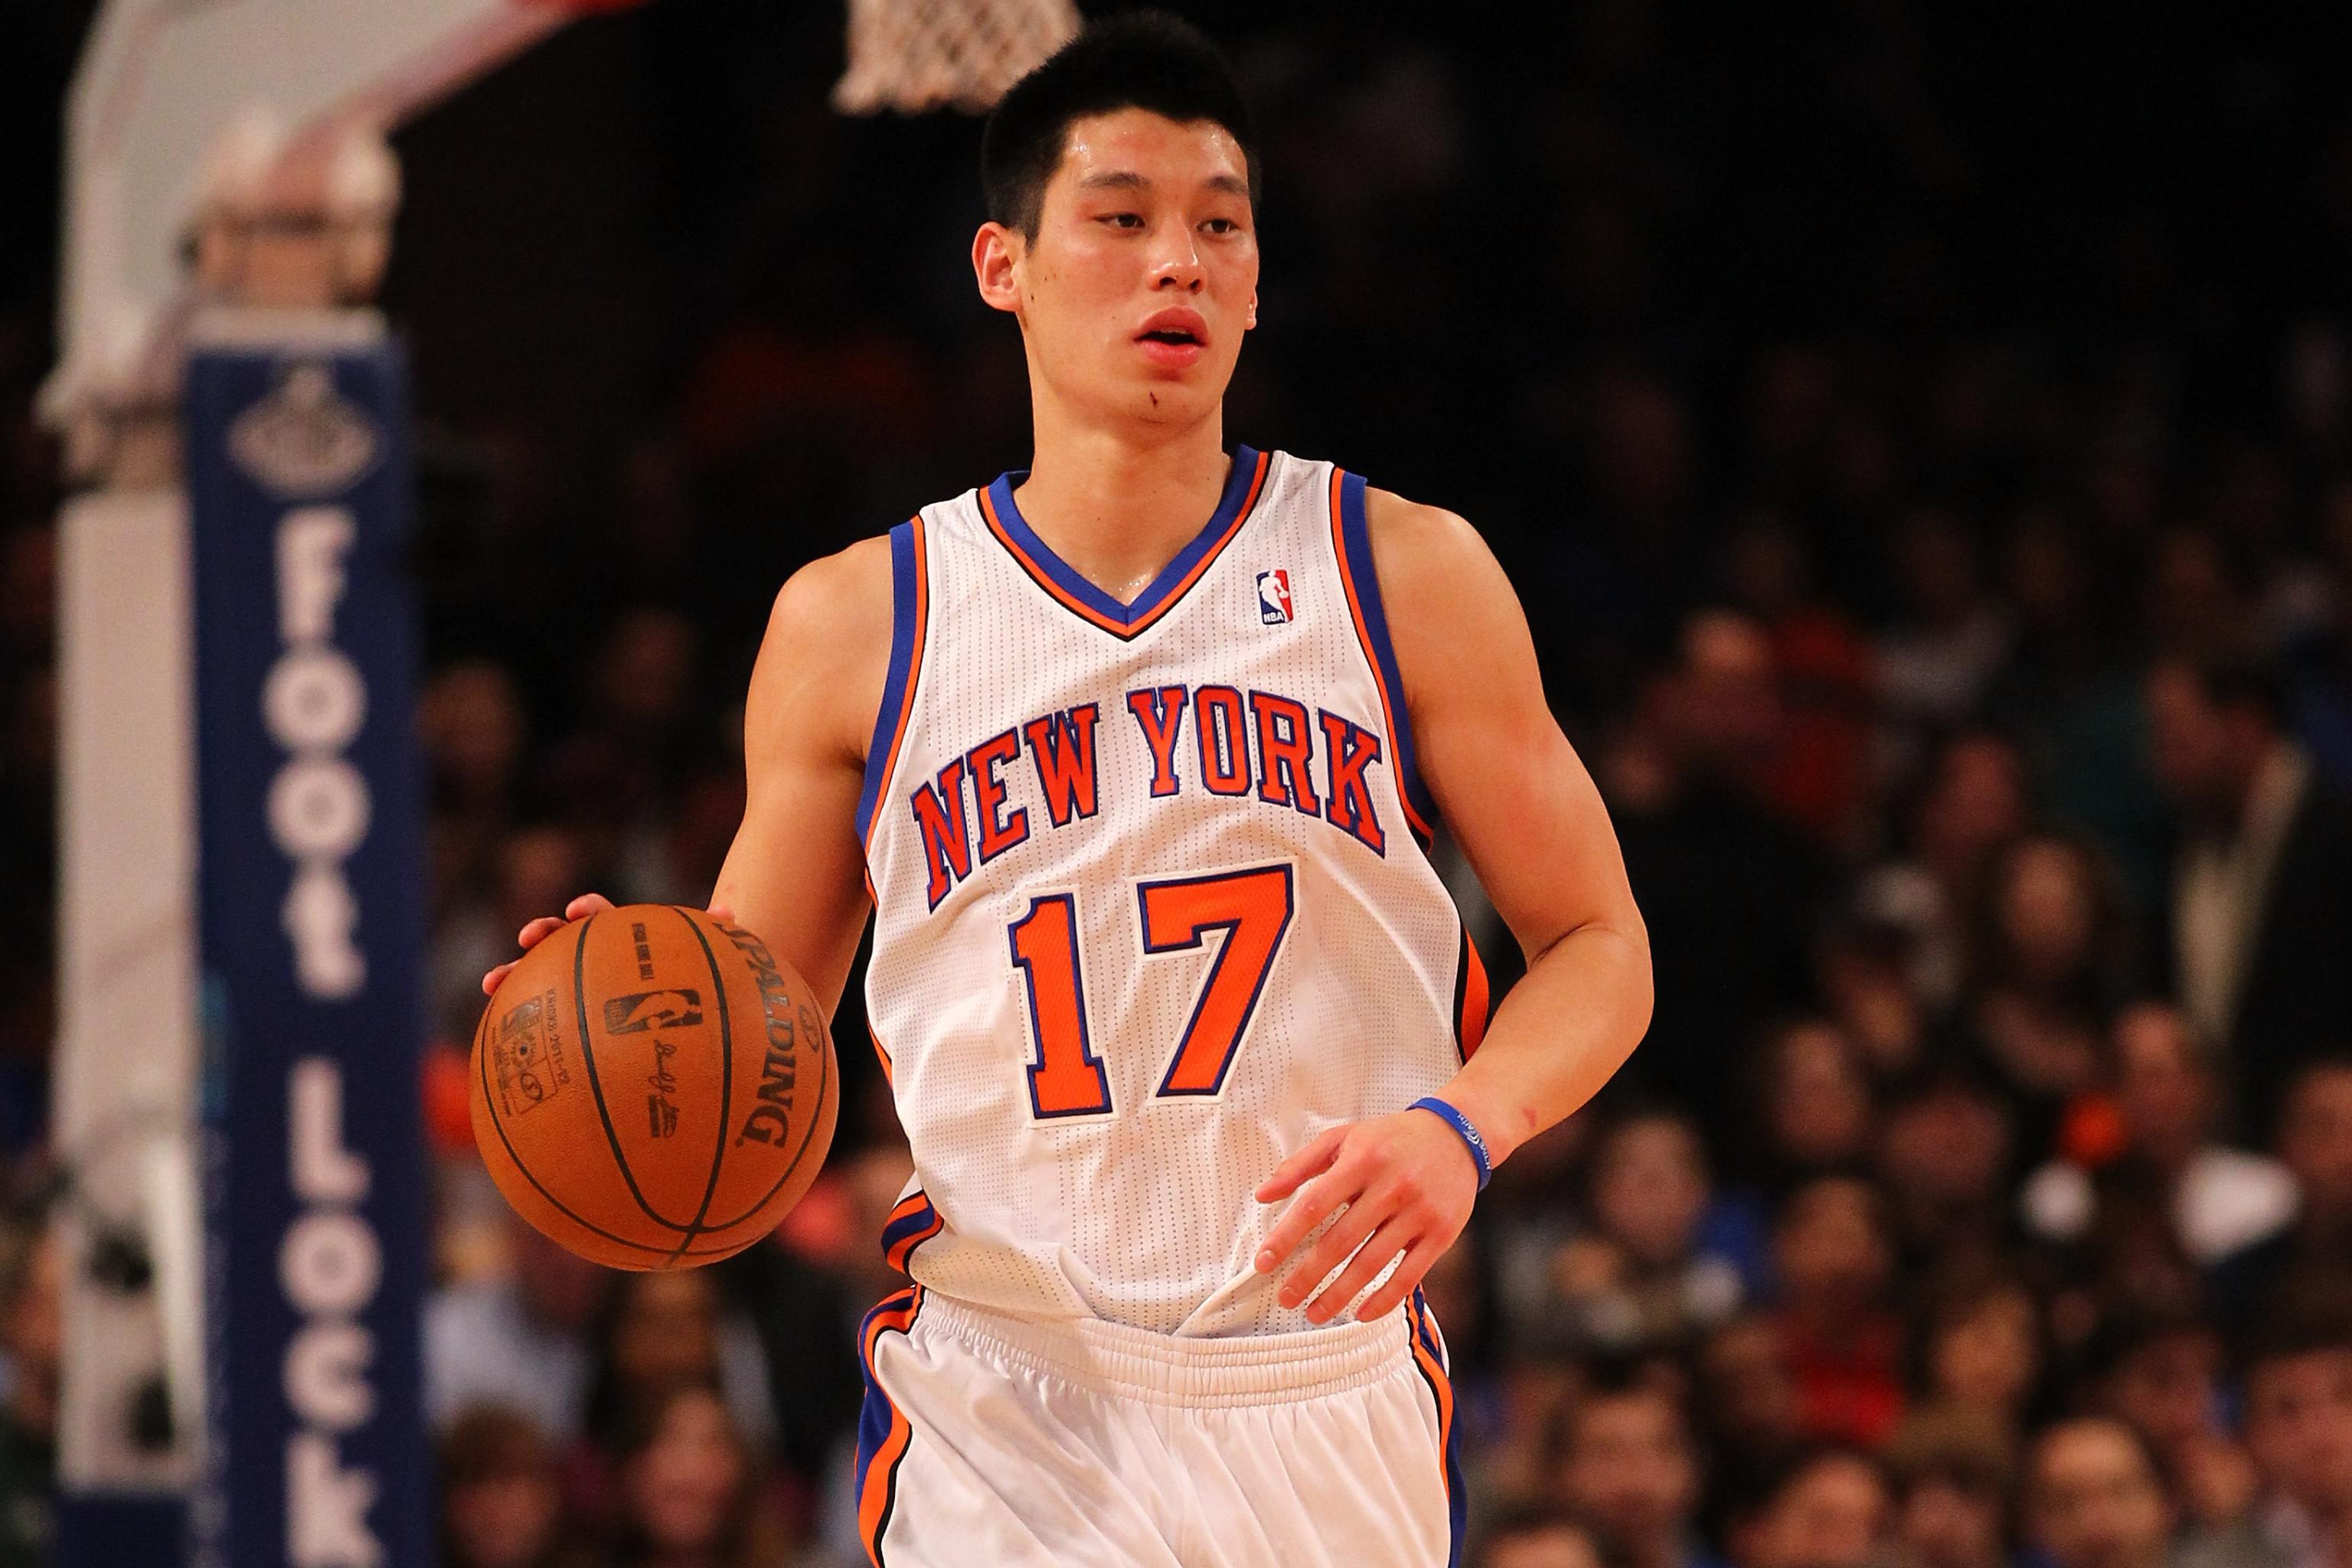 NY Knicks' Jeremy Lin hits game-winning 3-pointer in last second